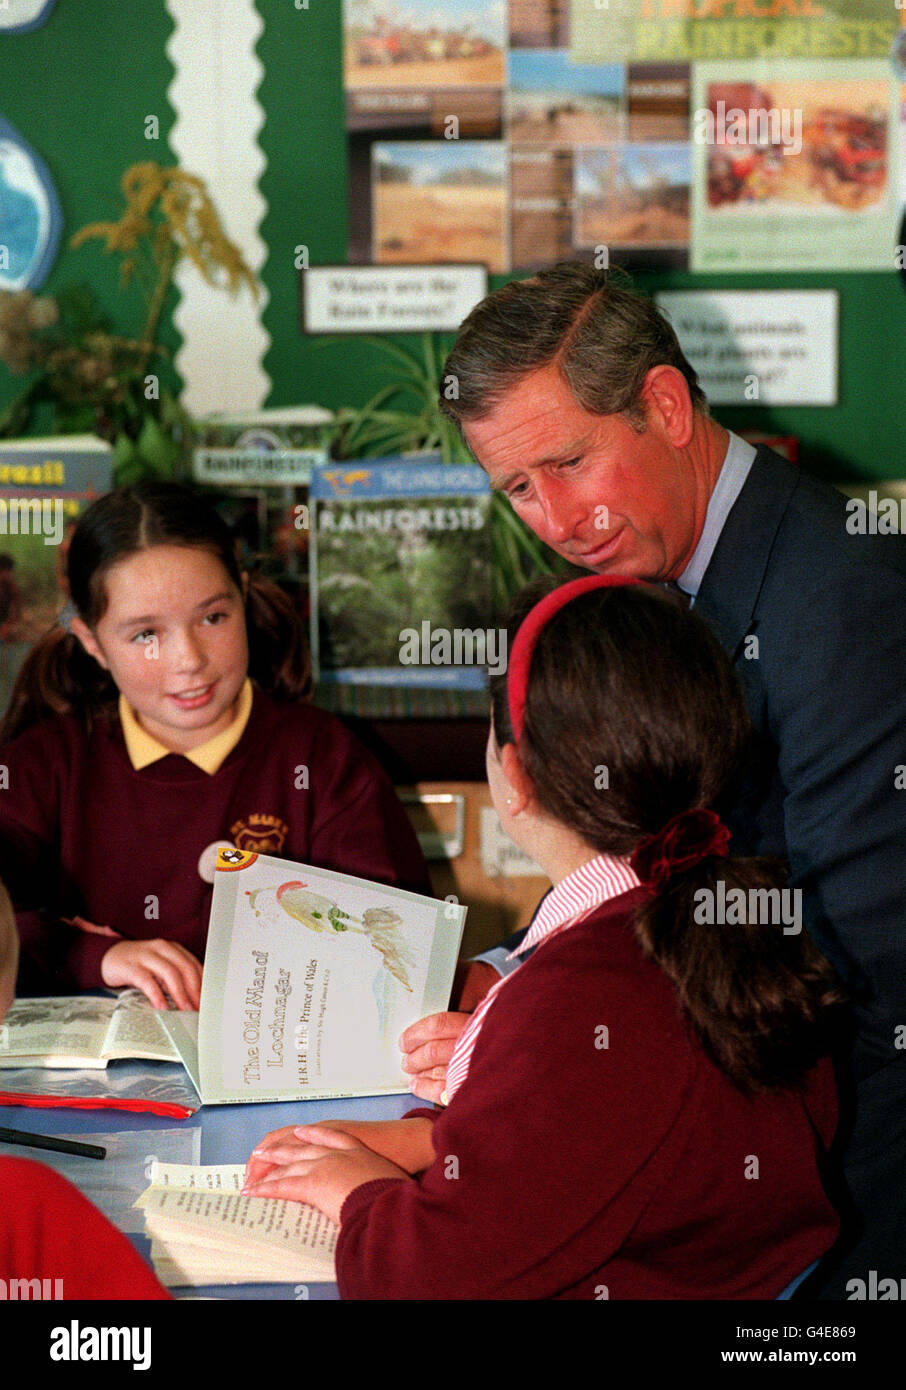 PA NEWS 14/9/98 THE PRINCE OF WALES READS FROM HIS BOOK 'THE OLD MAN OF LOCHNAGAR' TO CHILDREN FROM ST. MARK'S PRIMARY SCHOOL IN BRIGHTON. Stock Photo